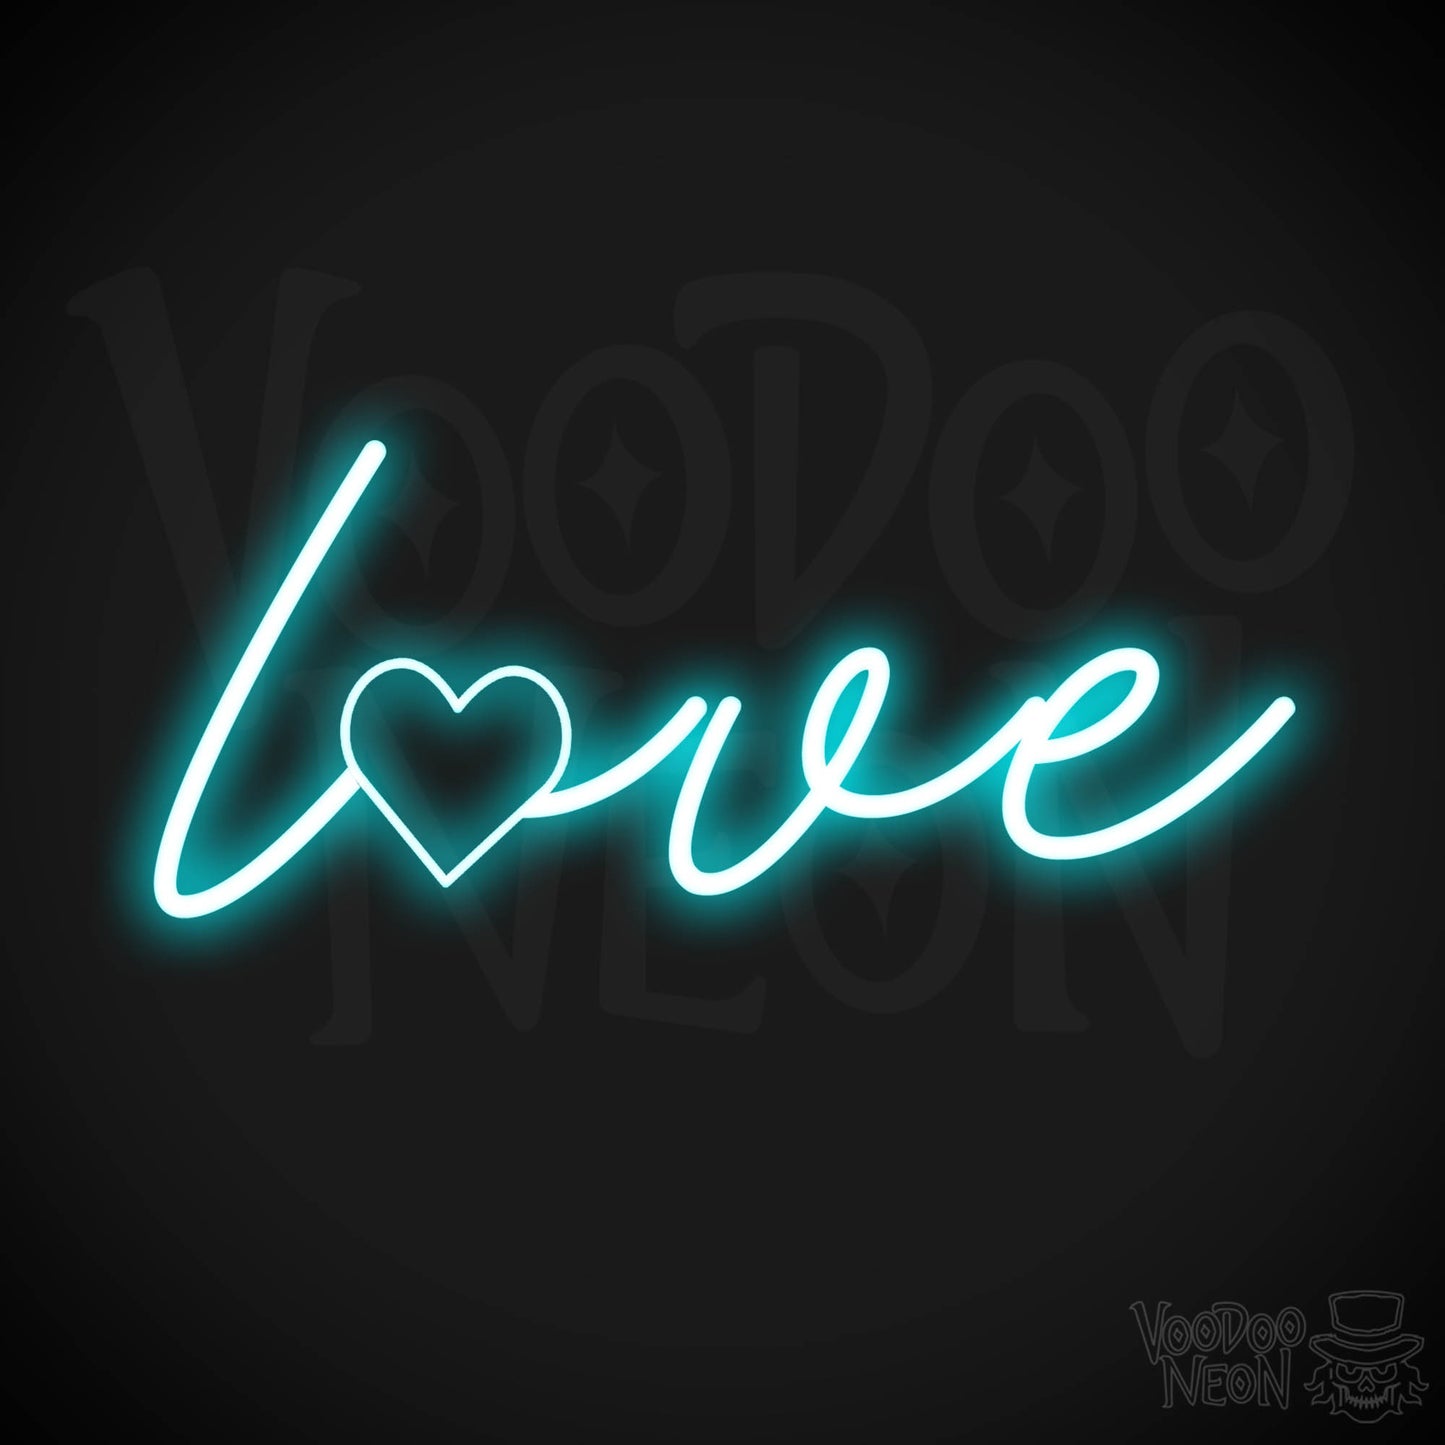 Neon Love Sign - Love Neon Sign - Love LED Neon Wall Art - Color Ice Blue